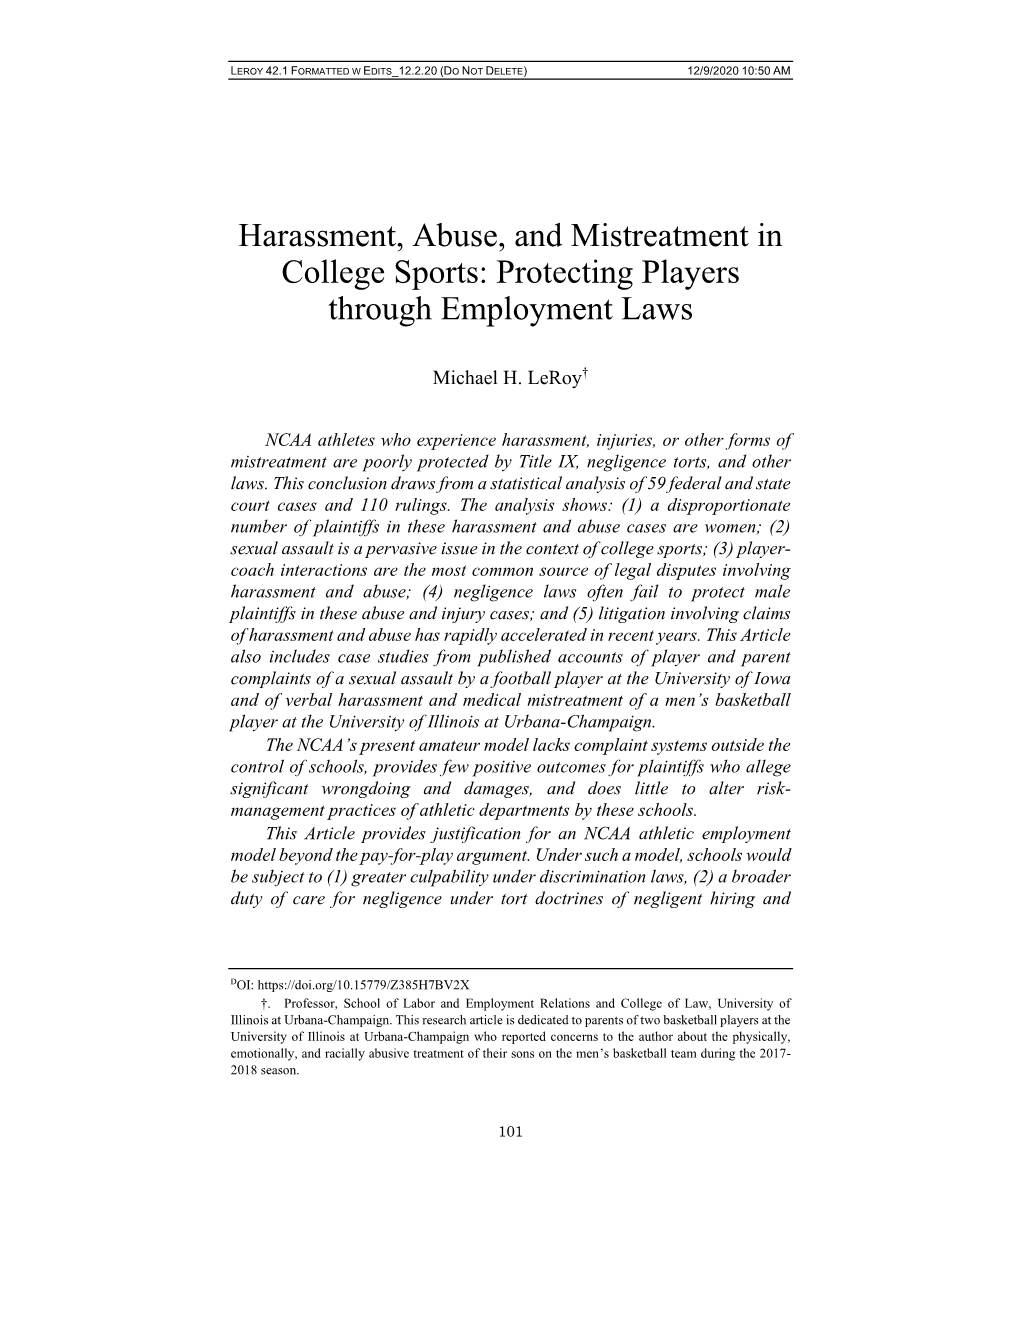 Harassment, Abuse, and Mistreatment in College Sports: Protecting Players Through Employment Laws